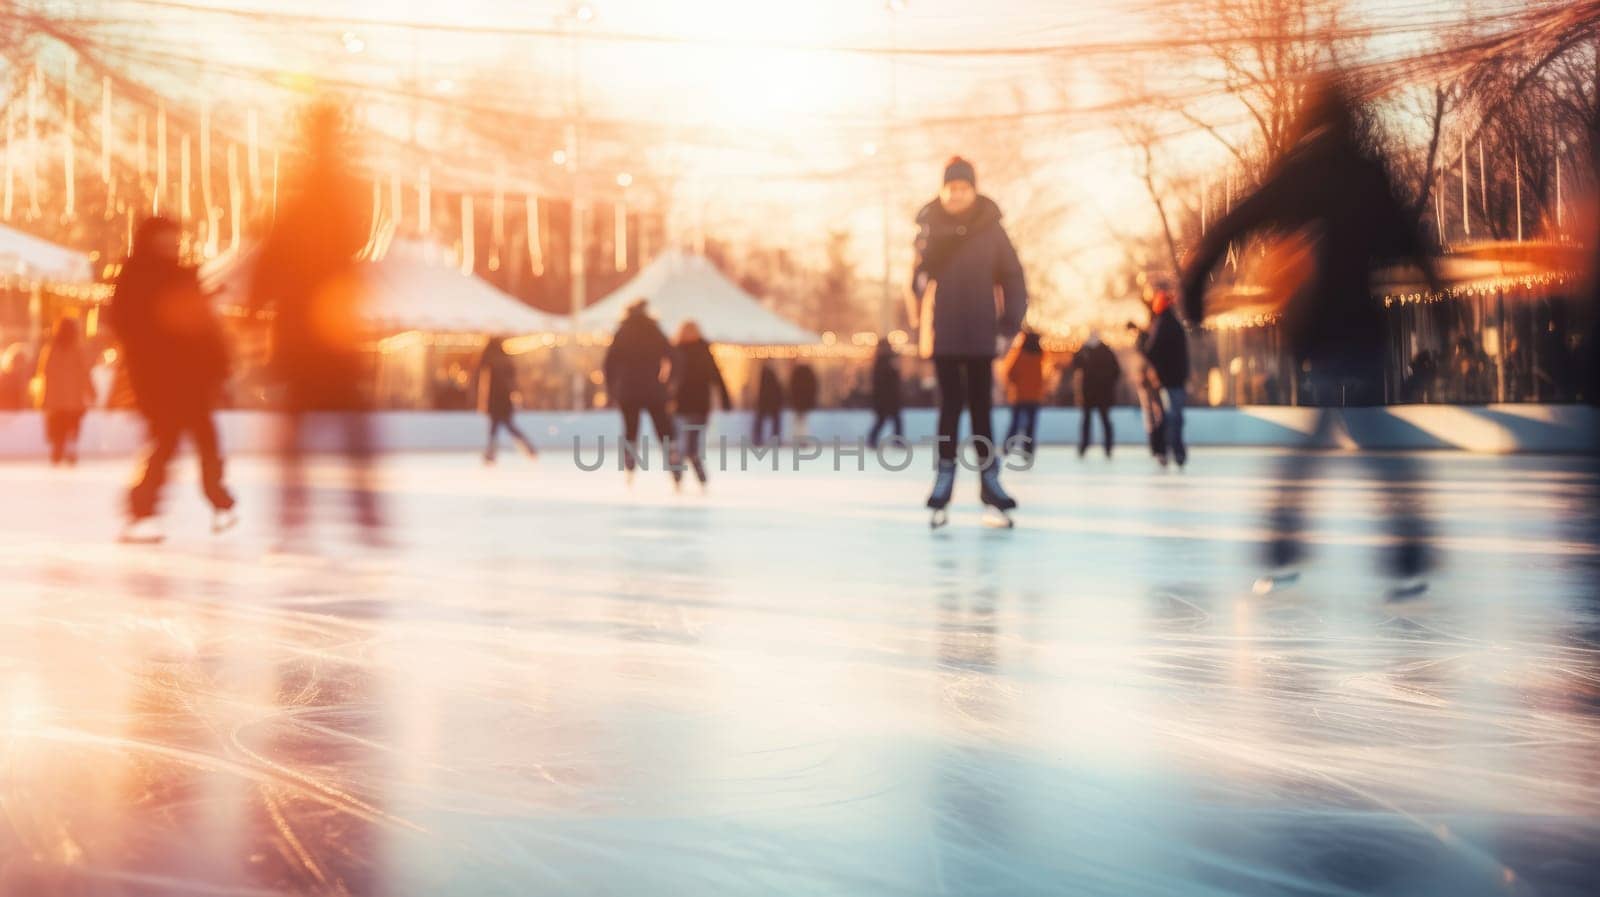 Ice skating rink in winter. Happy moments spent together. Blurred background by natali_brill